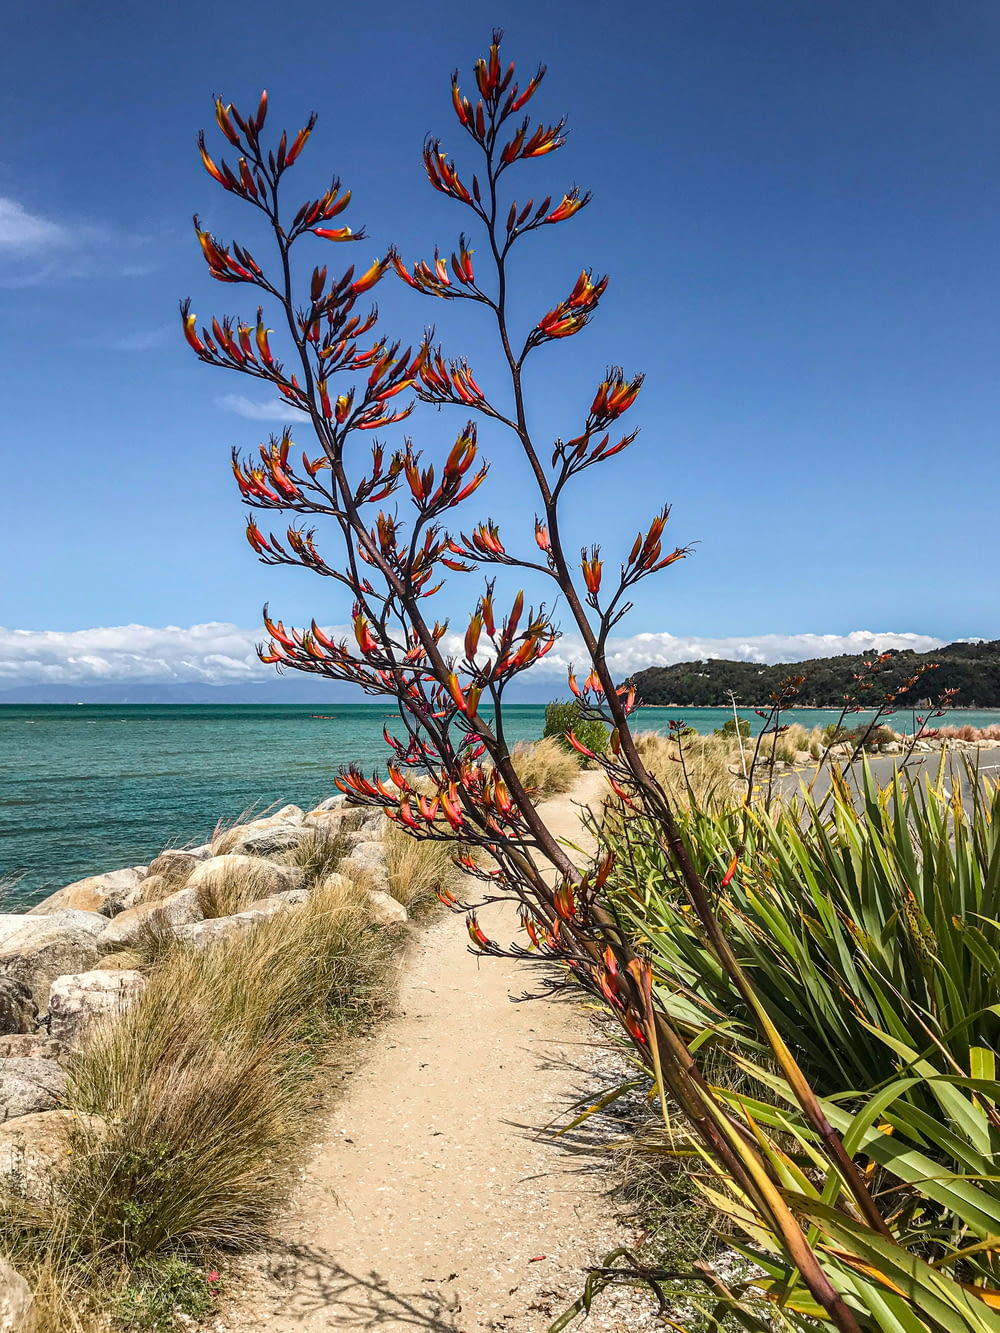 a plant with red flowers near the ocean